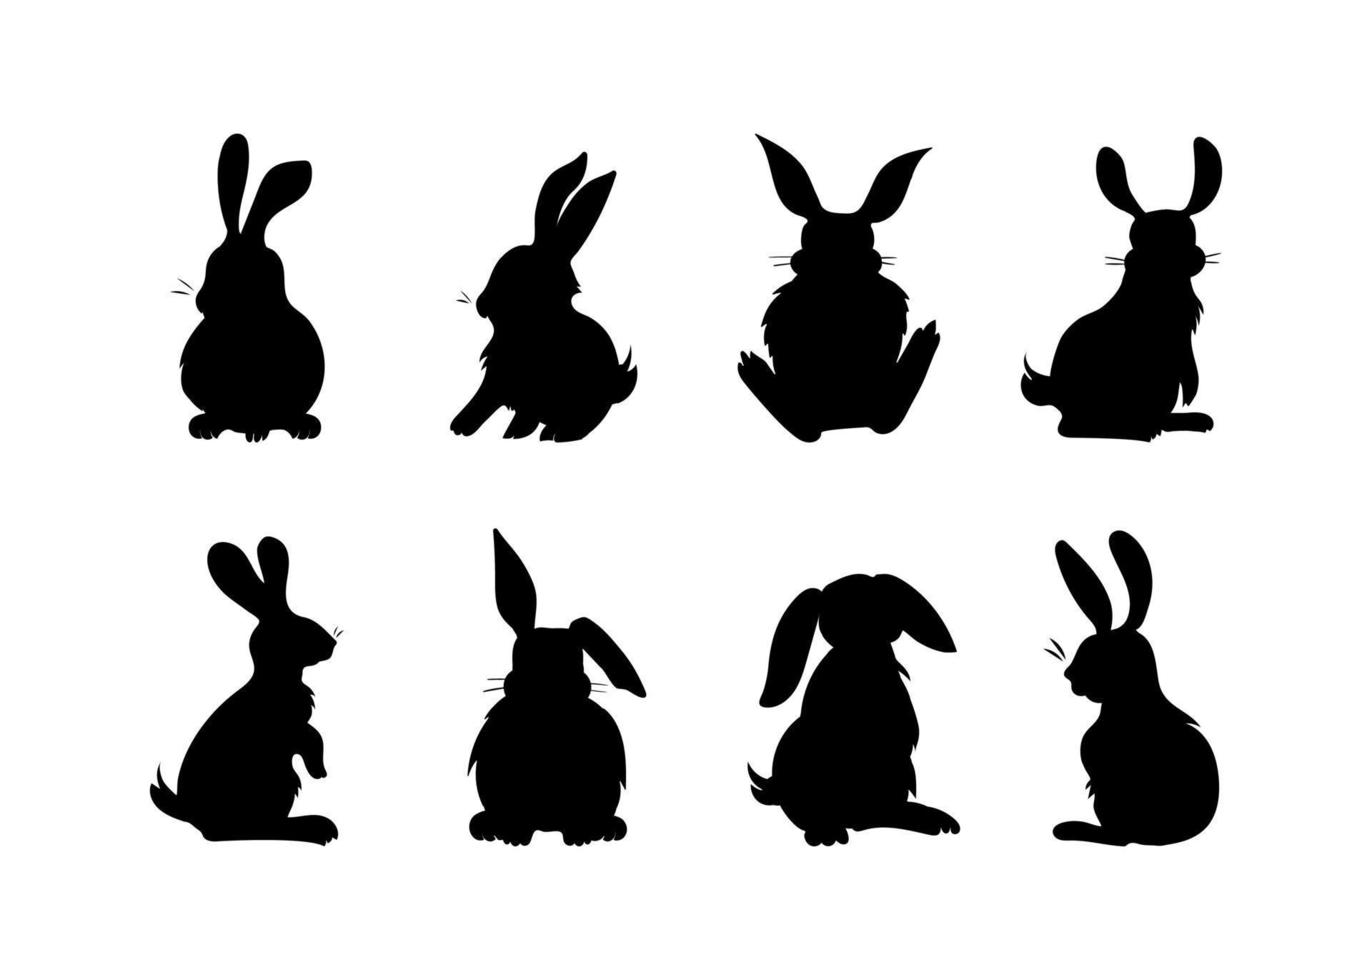 Set of illustrations of fluffy rabbits, hares. Bunnies in various poses. Hand-drawn silhouettes with black color fill. Artistic symbolic clip art made in simple lines, for prints vector